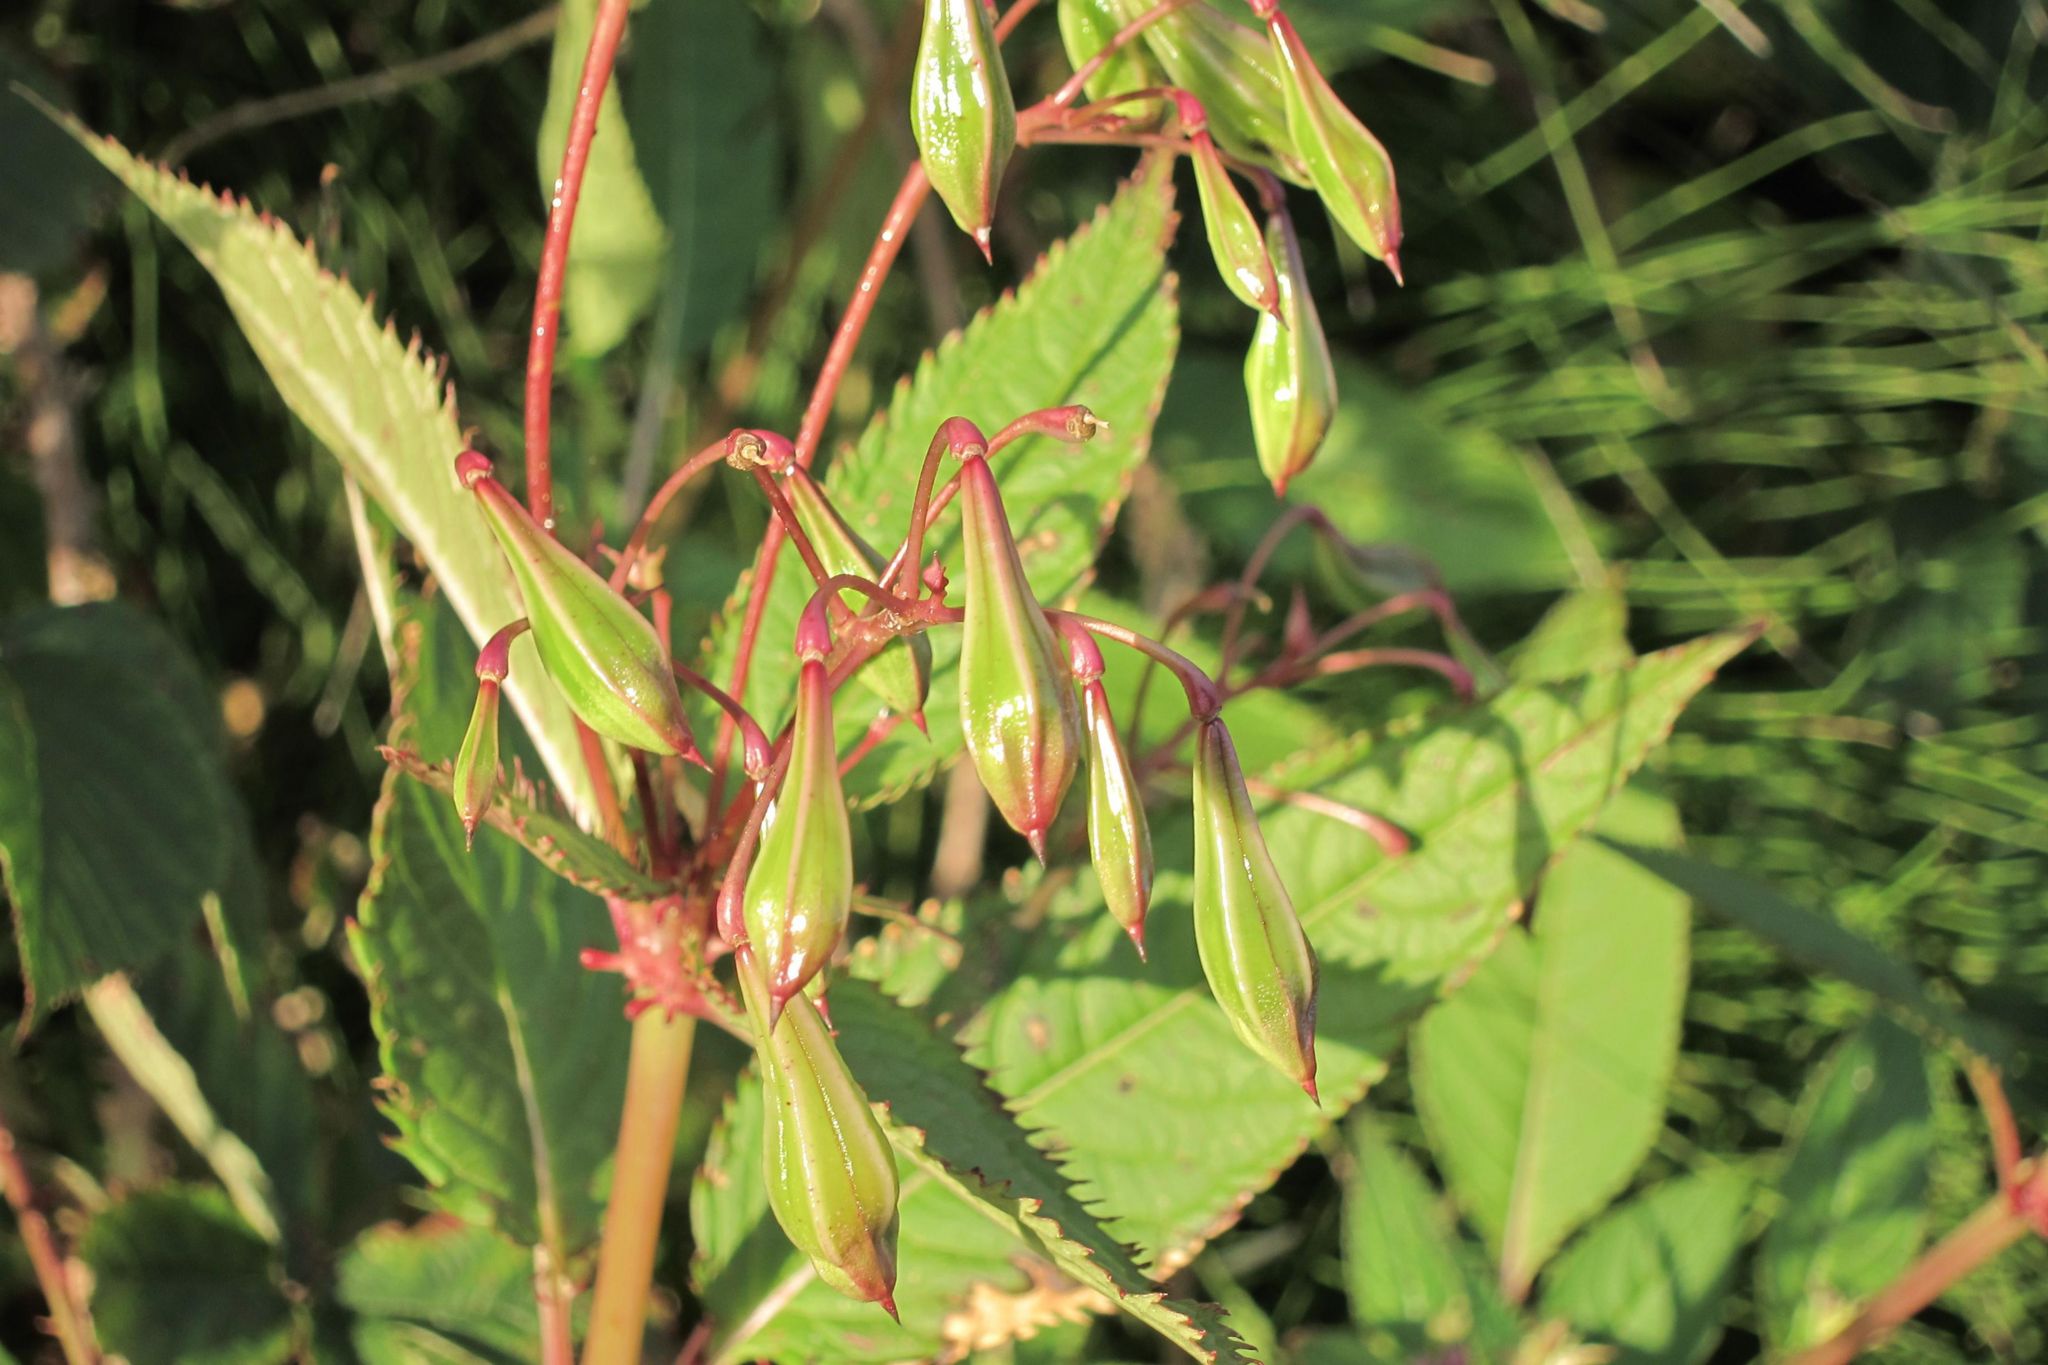 The Himalayan balsam seed pods